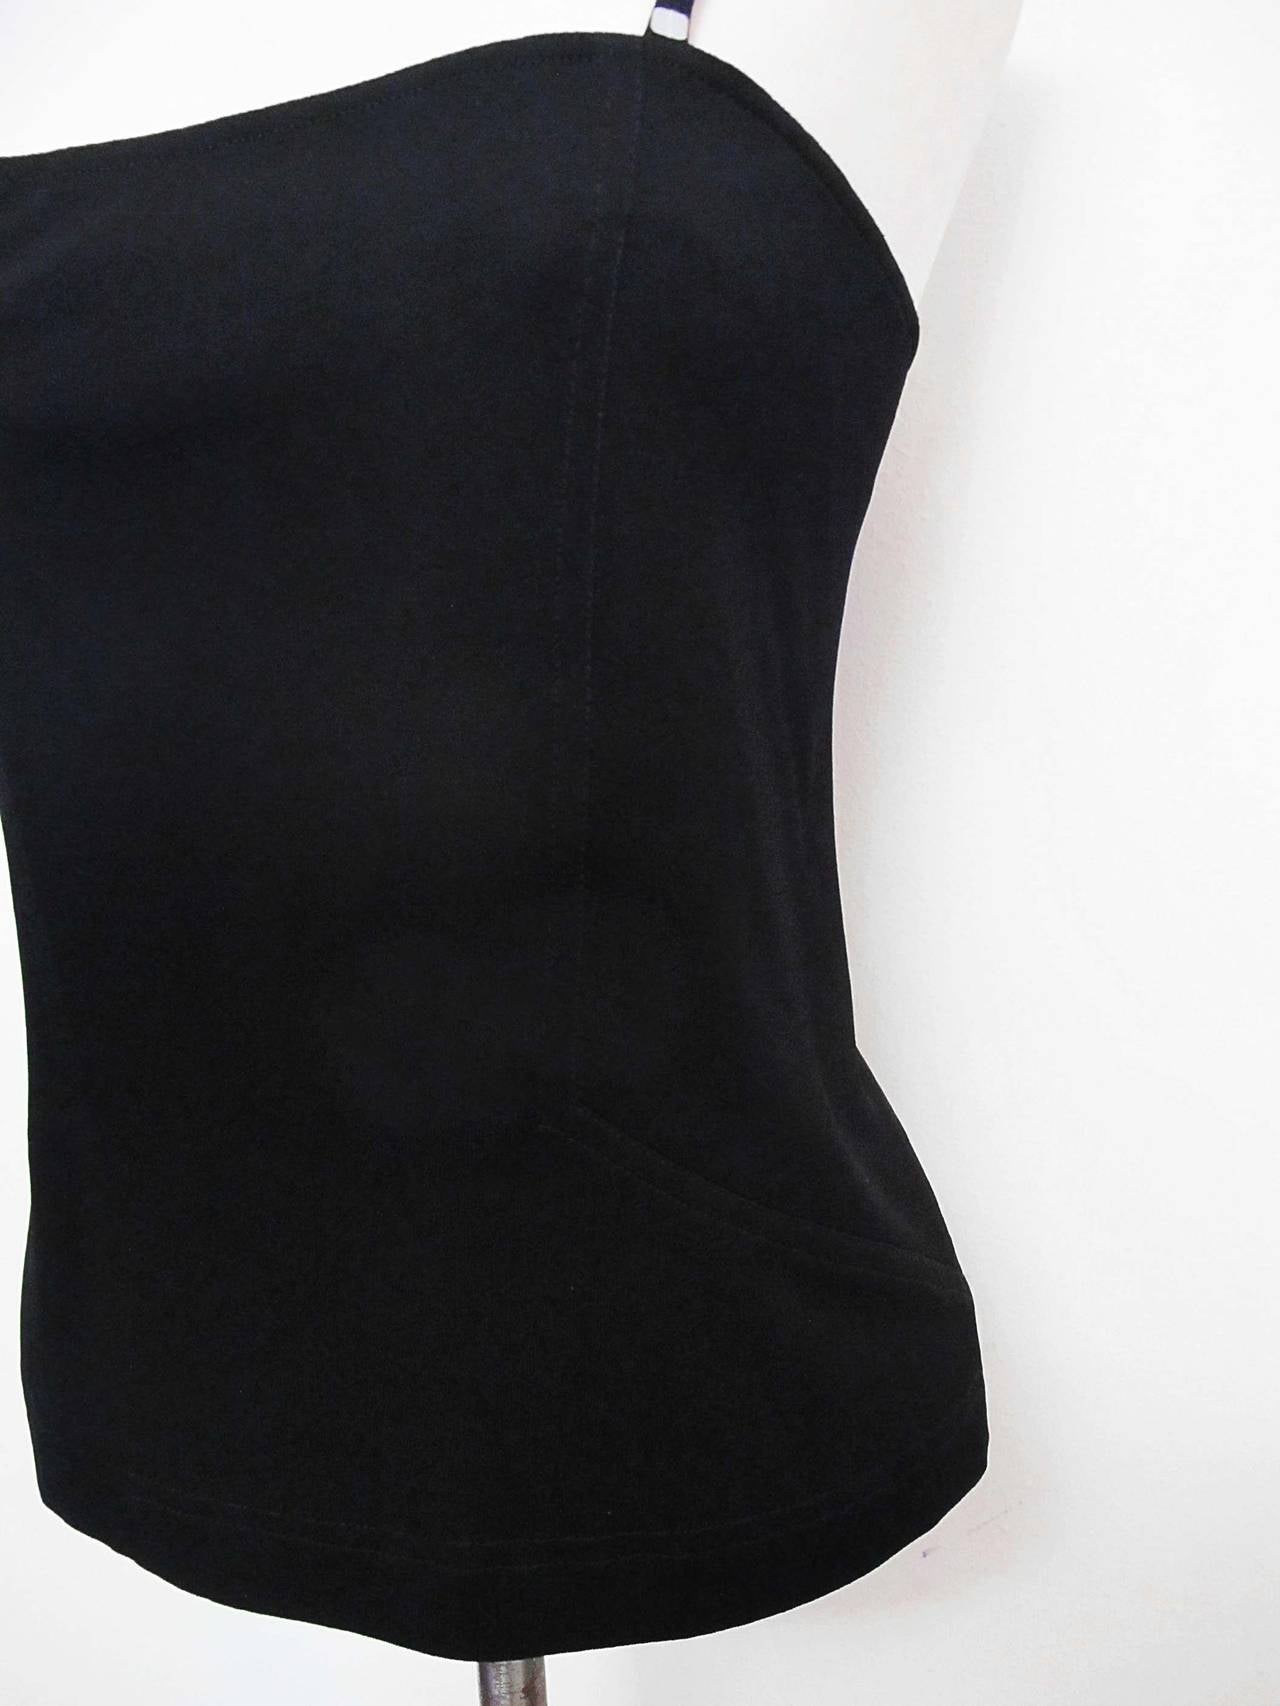 New Jean Muir Black Tank top with Silver Sequins For Sale 2